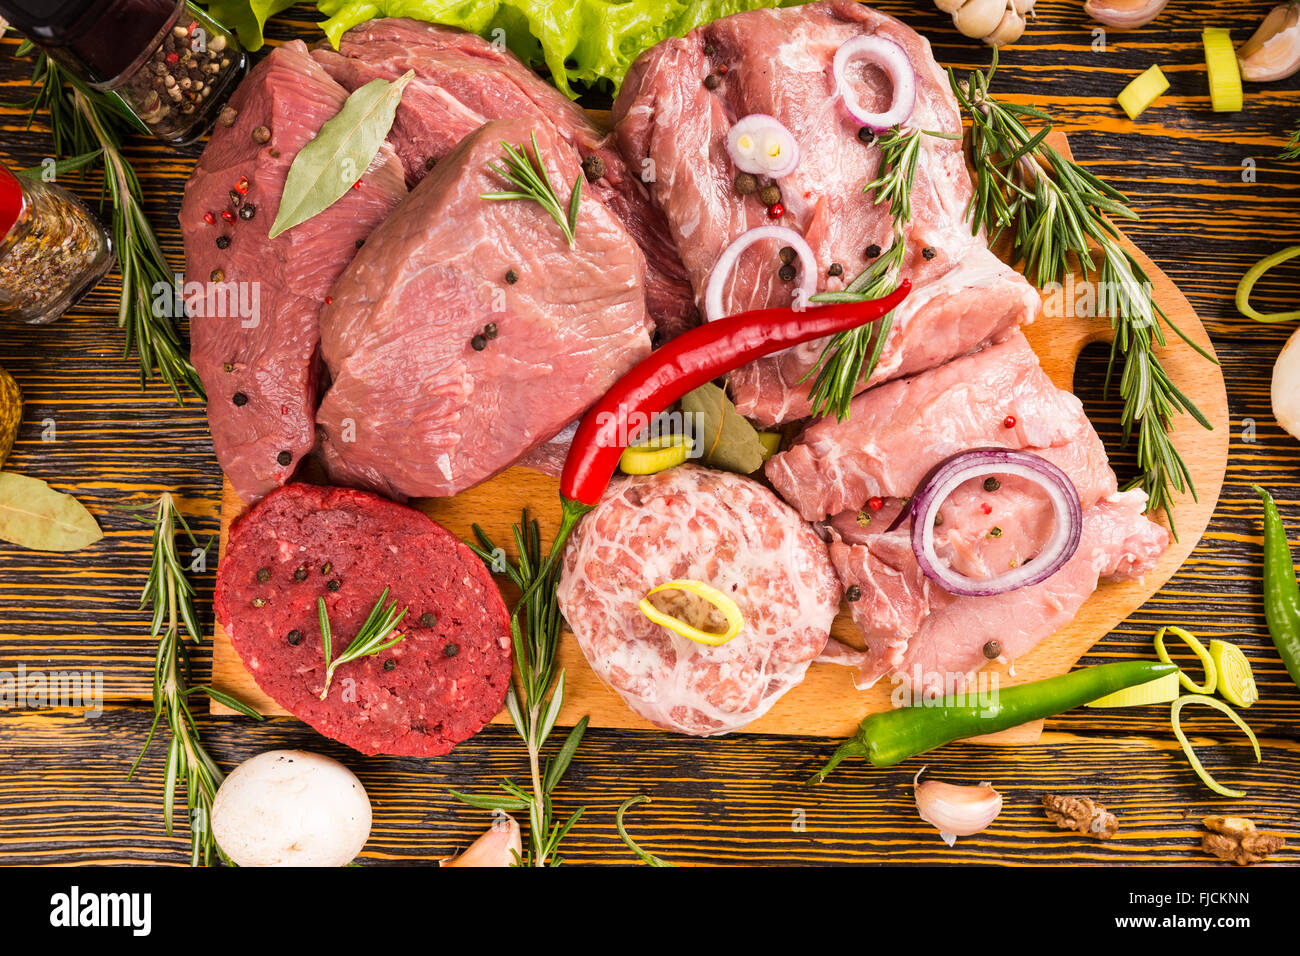 First person perspective of and abundance of raw beef and pork with seasonings surrounded by wood grain table Stock Photo